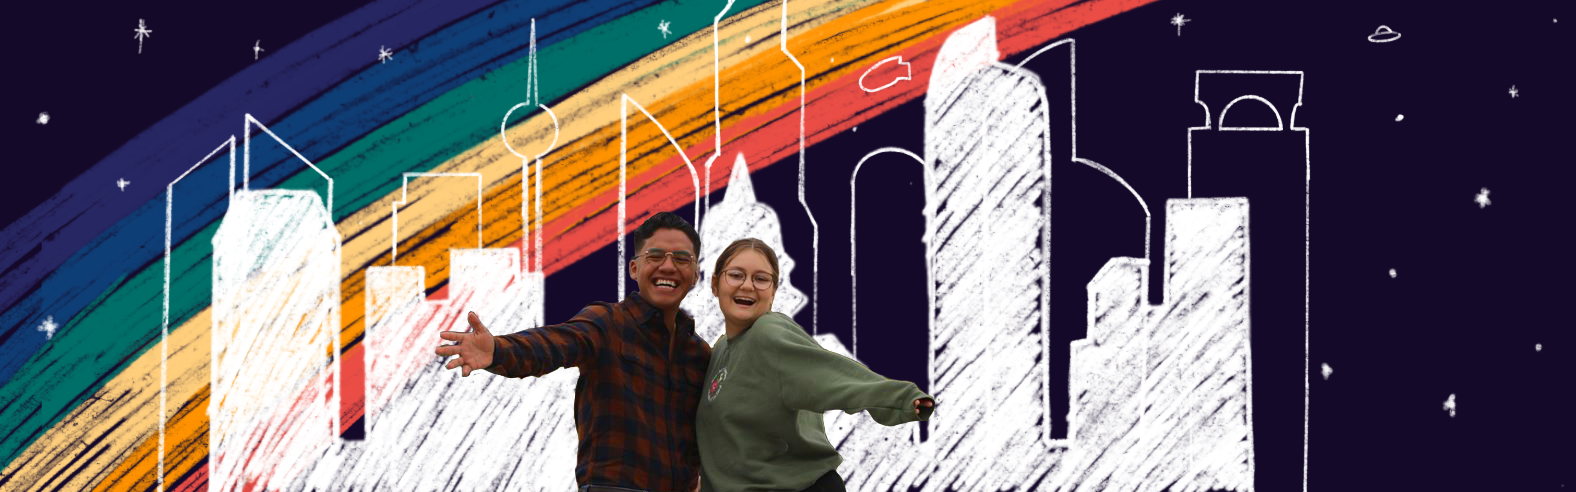 Mixed media photo of SGA President Juan Gonzalez and VP Morgan DeVito on cmapus with an illustration of a rainbow and city skyline